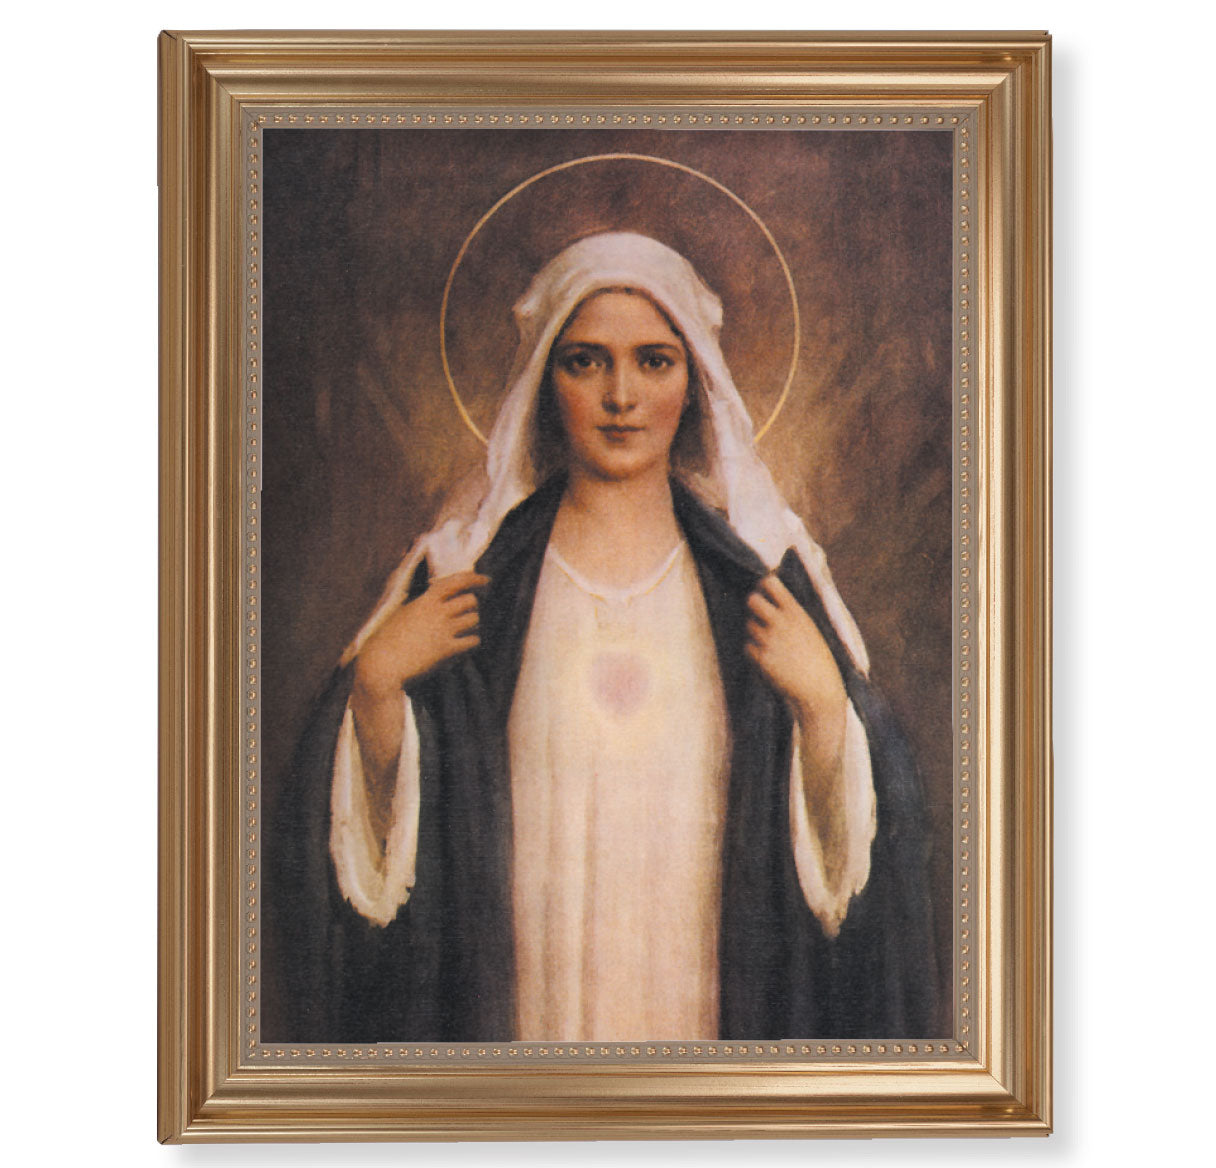 Immaculate Heart of Mary Gold Framed Art